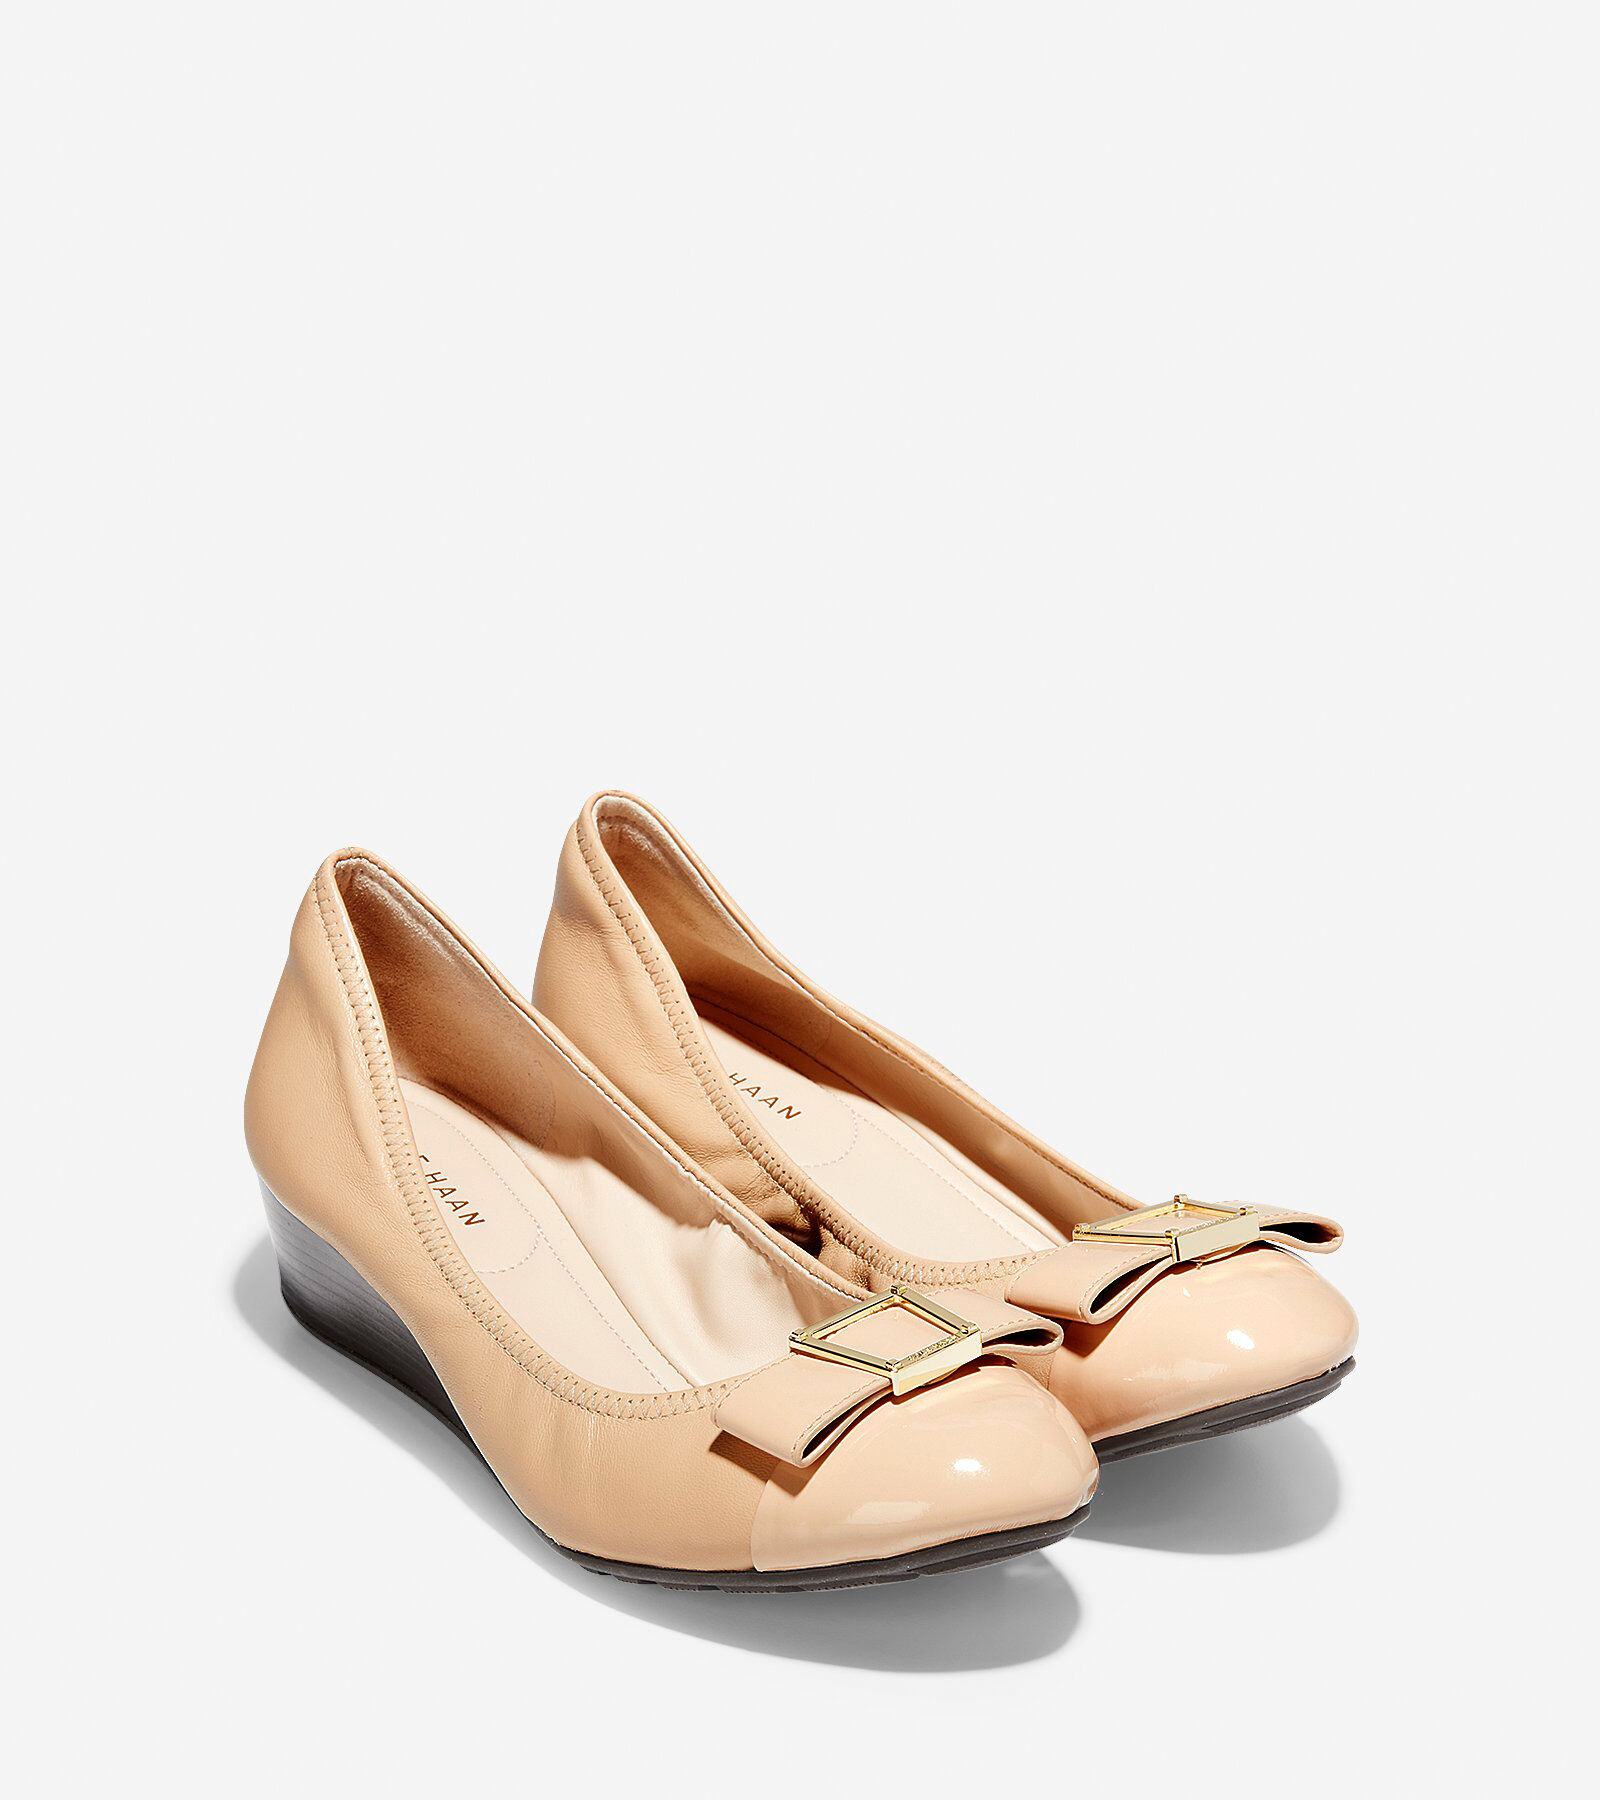 Women's Emory Bow Wedge in Nude Leather 